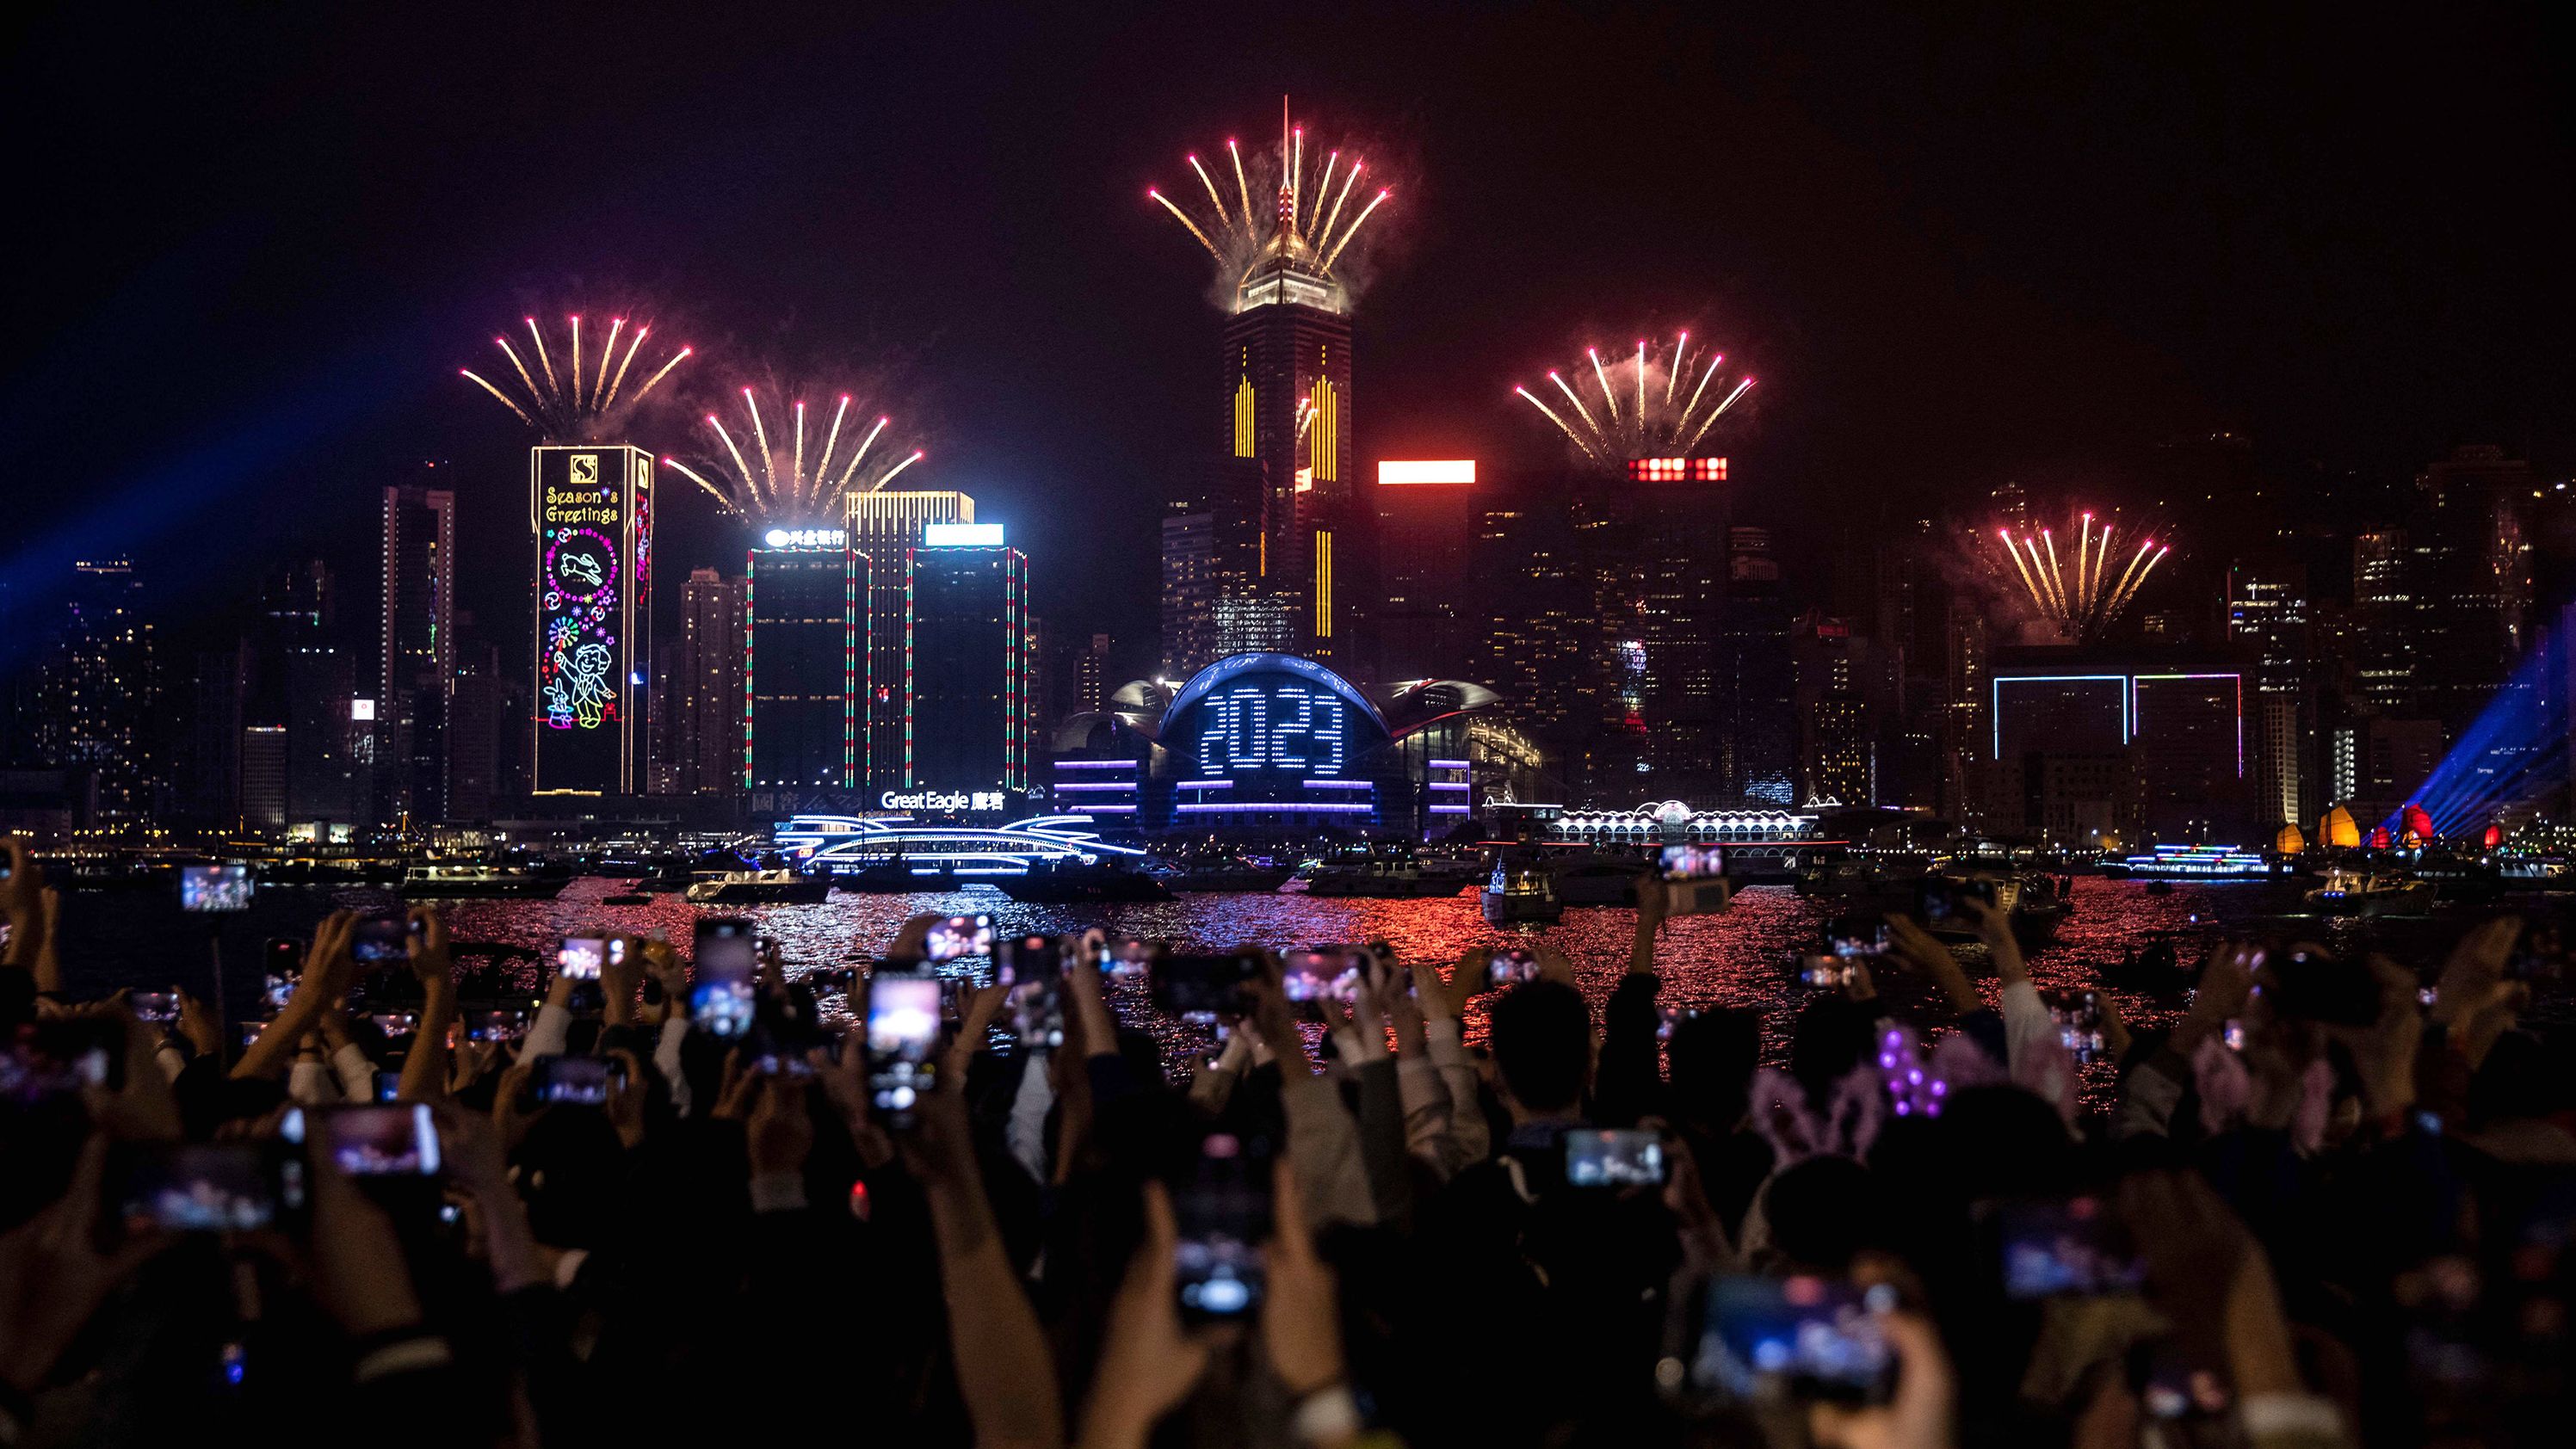 New Year's revelers watch a fireworks and laser show in Hong Kong.